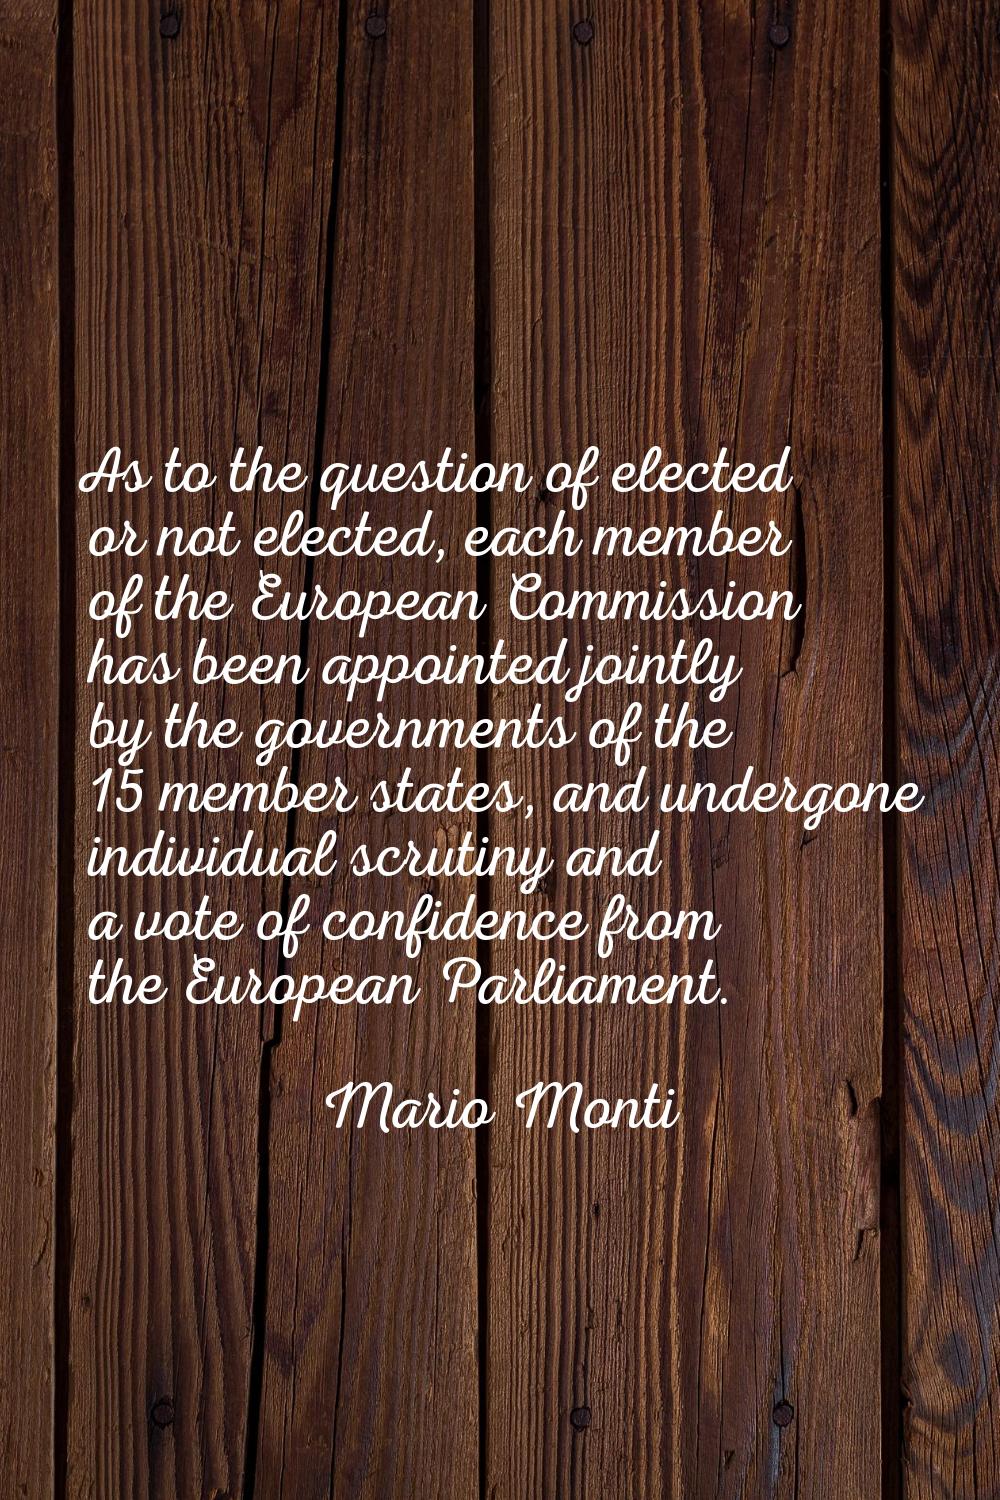 As to the question of elected or not elected, each member of the European Commission has been appoi